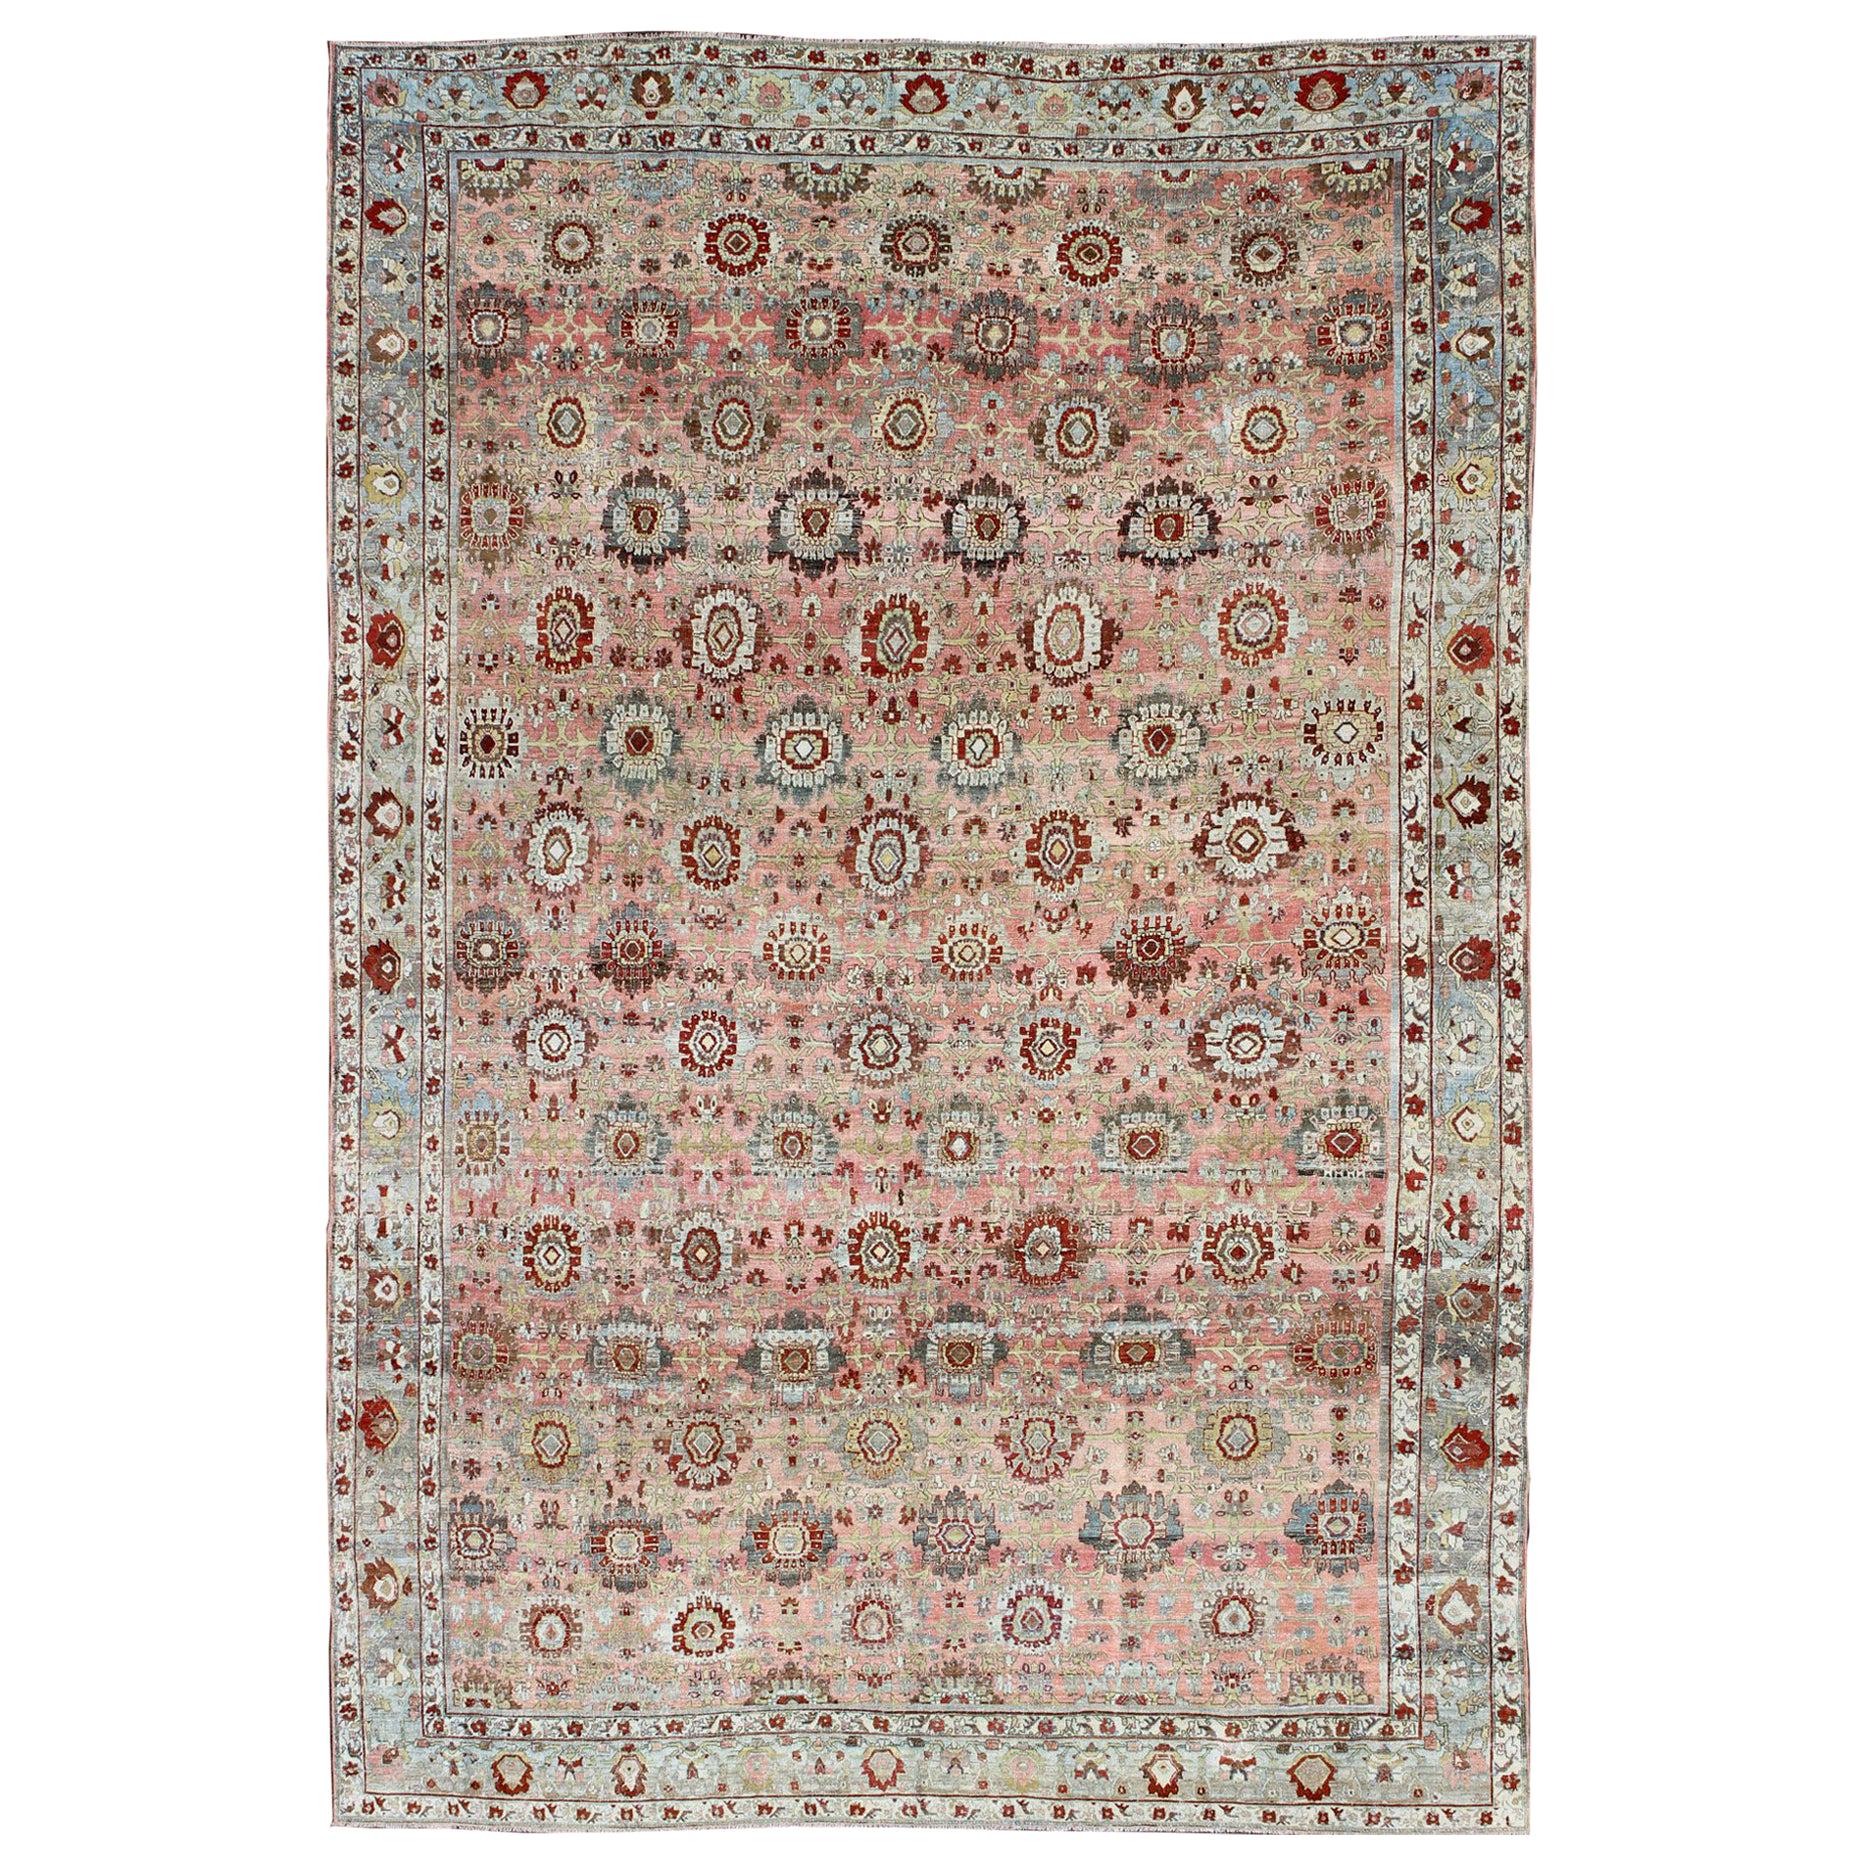 Antique Persian Bidjar Rug with All-Over Design in Light Pink & Light Gray For Sale